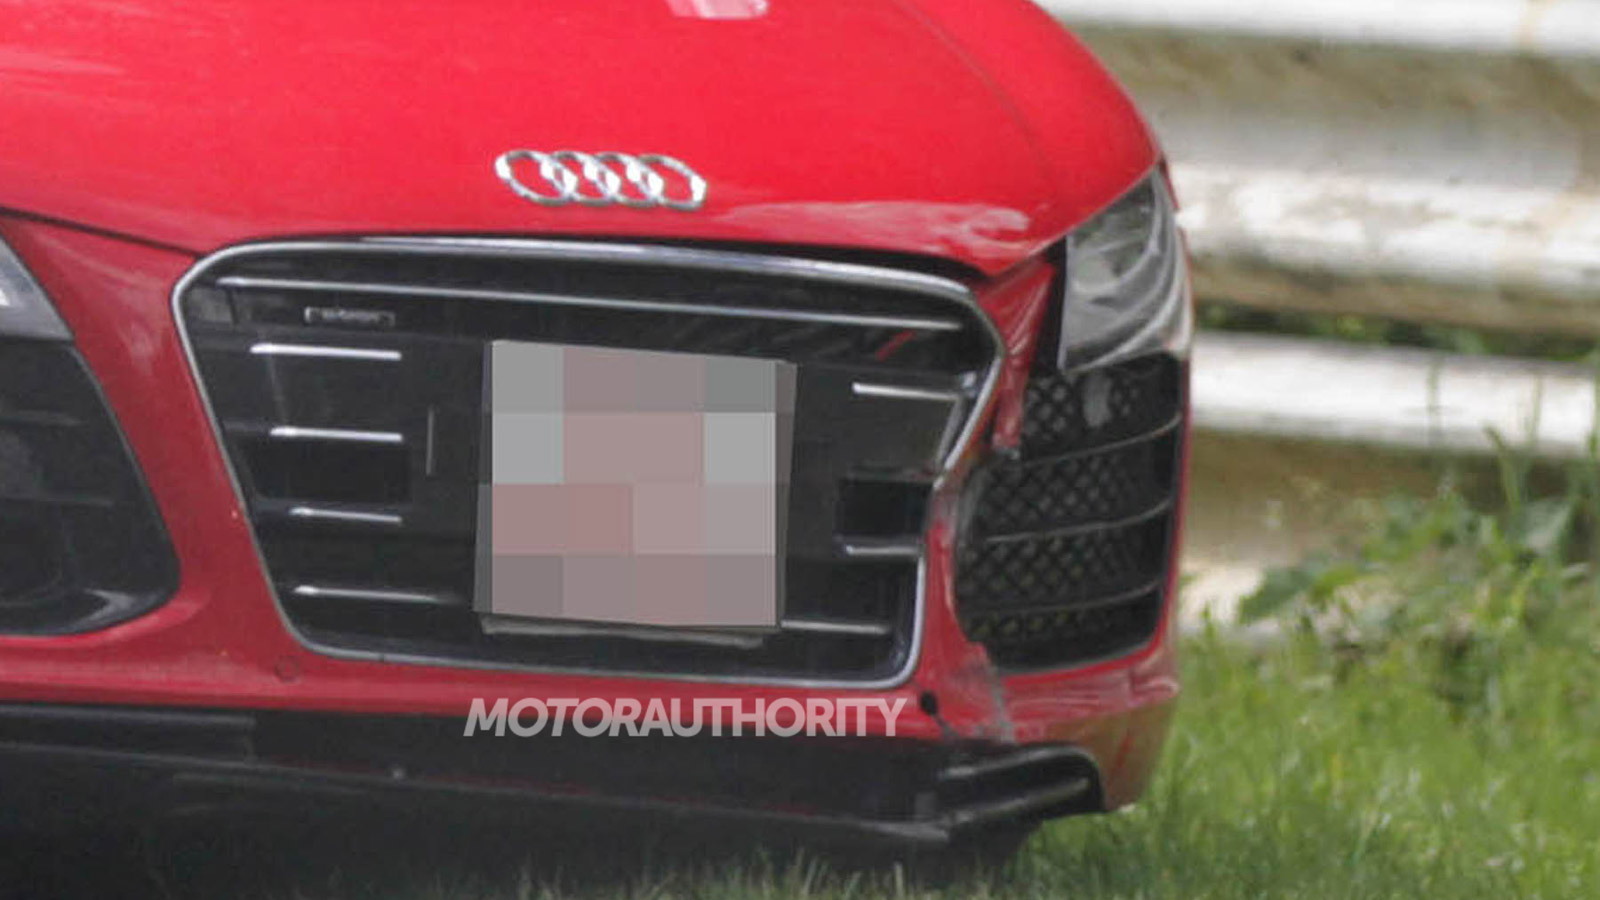 2013 Audi R8 e-tron that crashed at the Nürburgring in July 2012